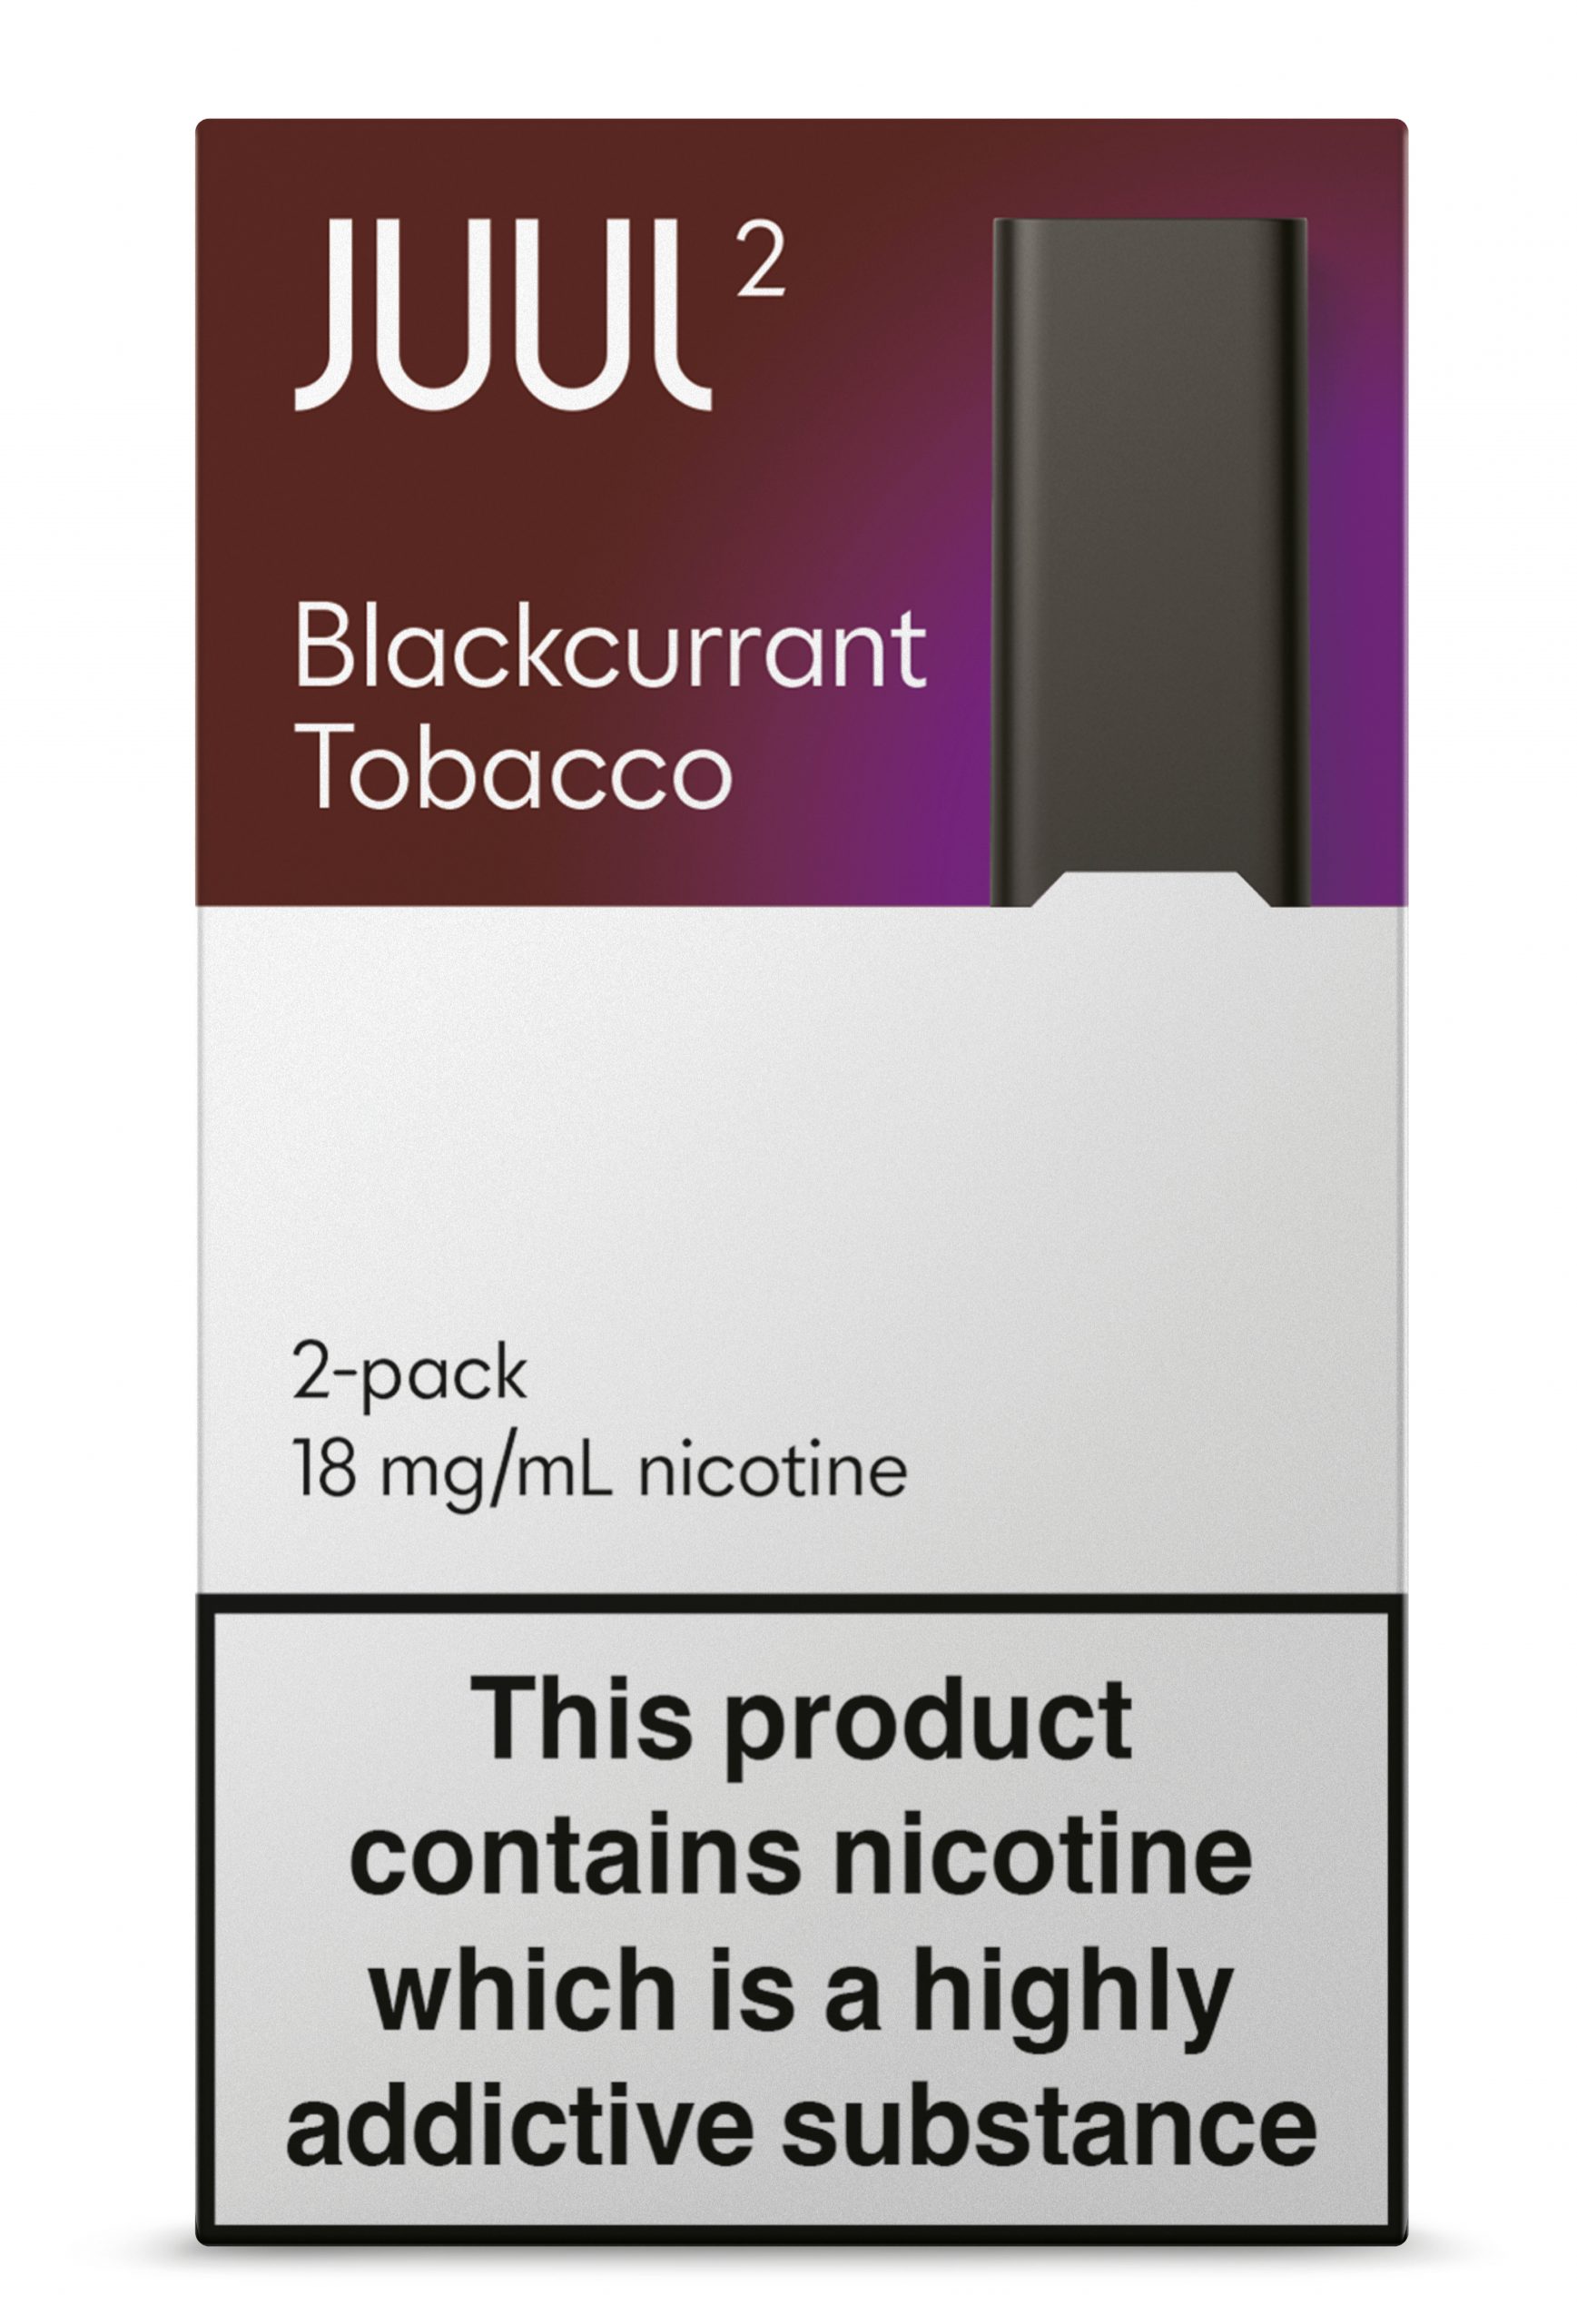 JUUL2 wins prestigious Product of the Year 2023